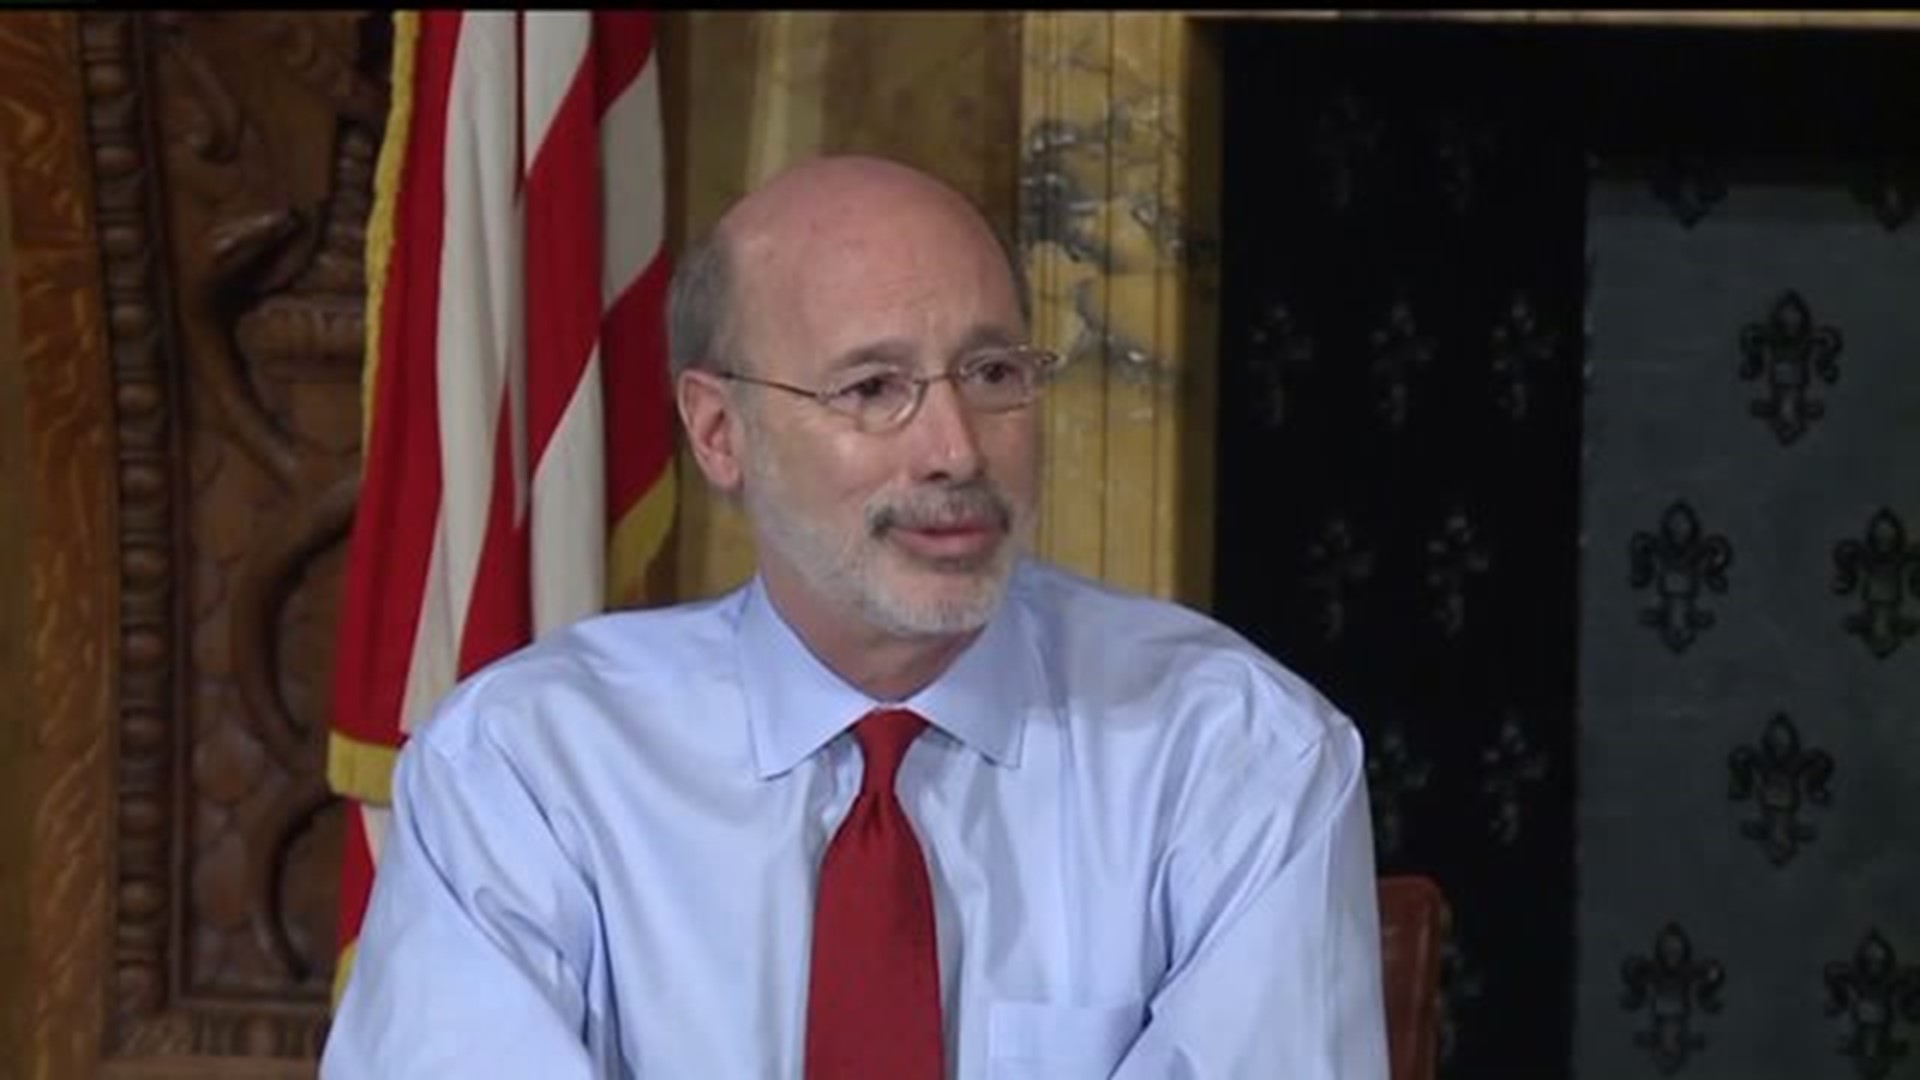 Gov. Wolf treatable form of prostate cancer